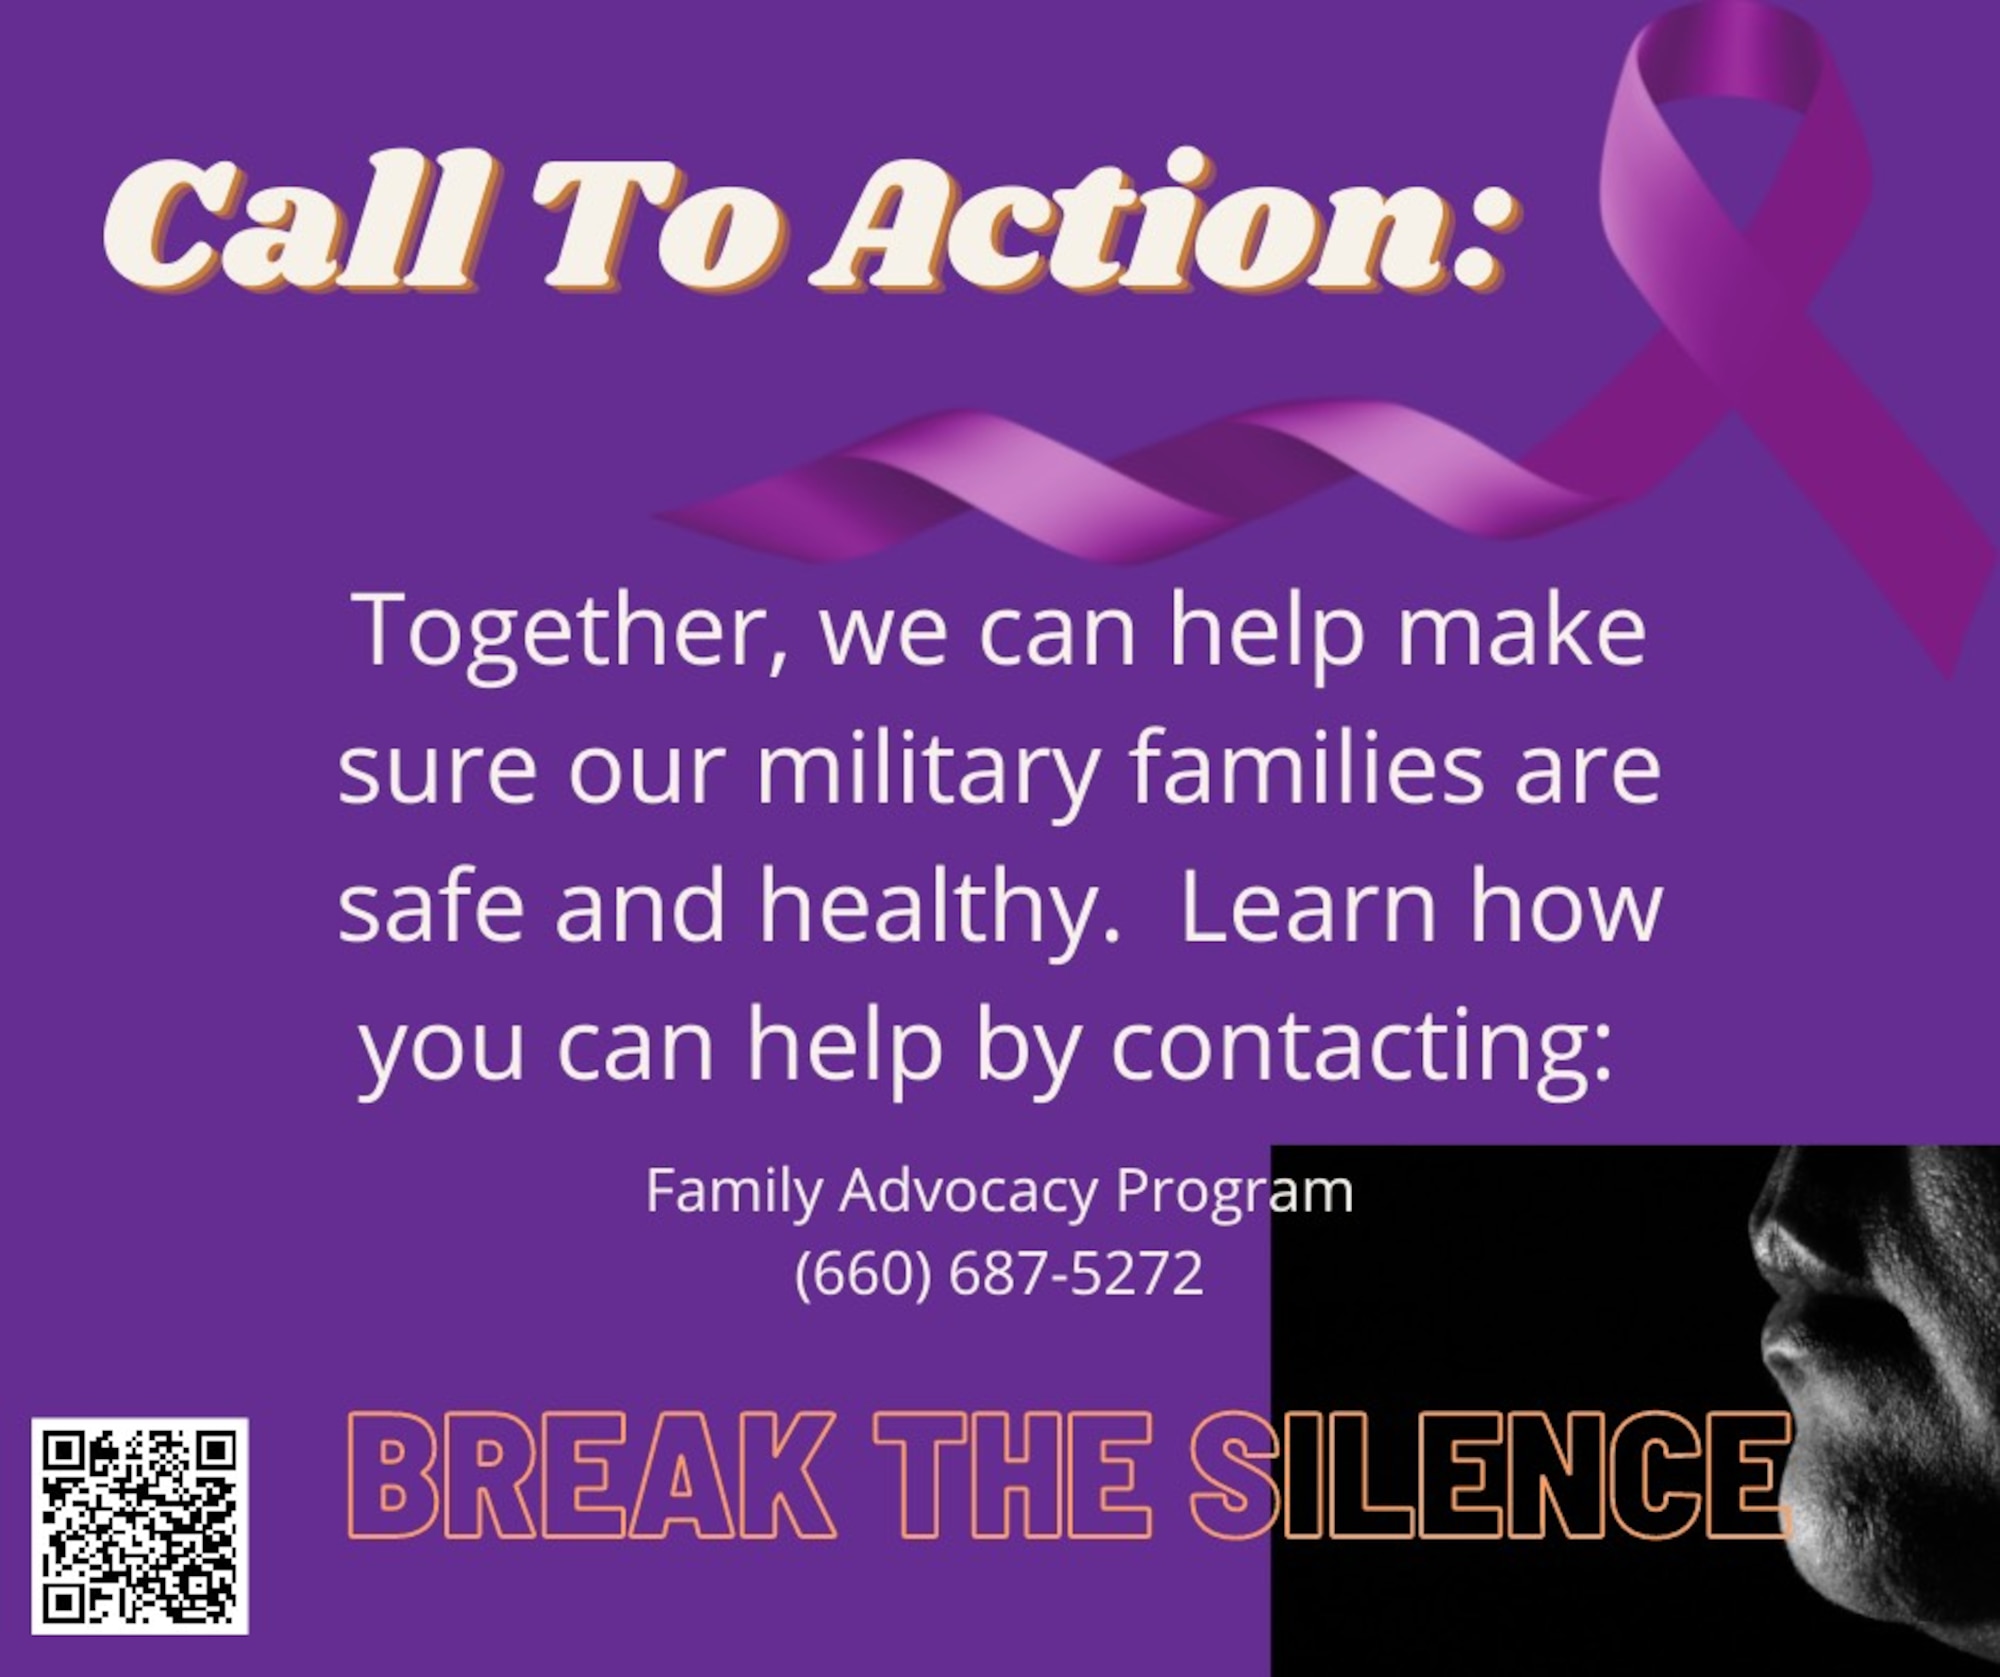 Together, we can help make sure our military families are safe and healthy. Learn how you can help by contacting: Family Advocacy Program 660-687-5272